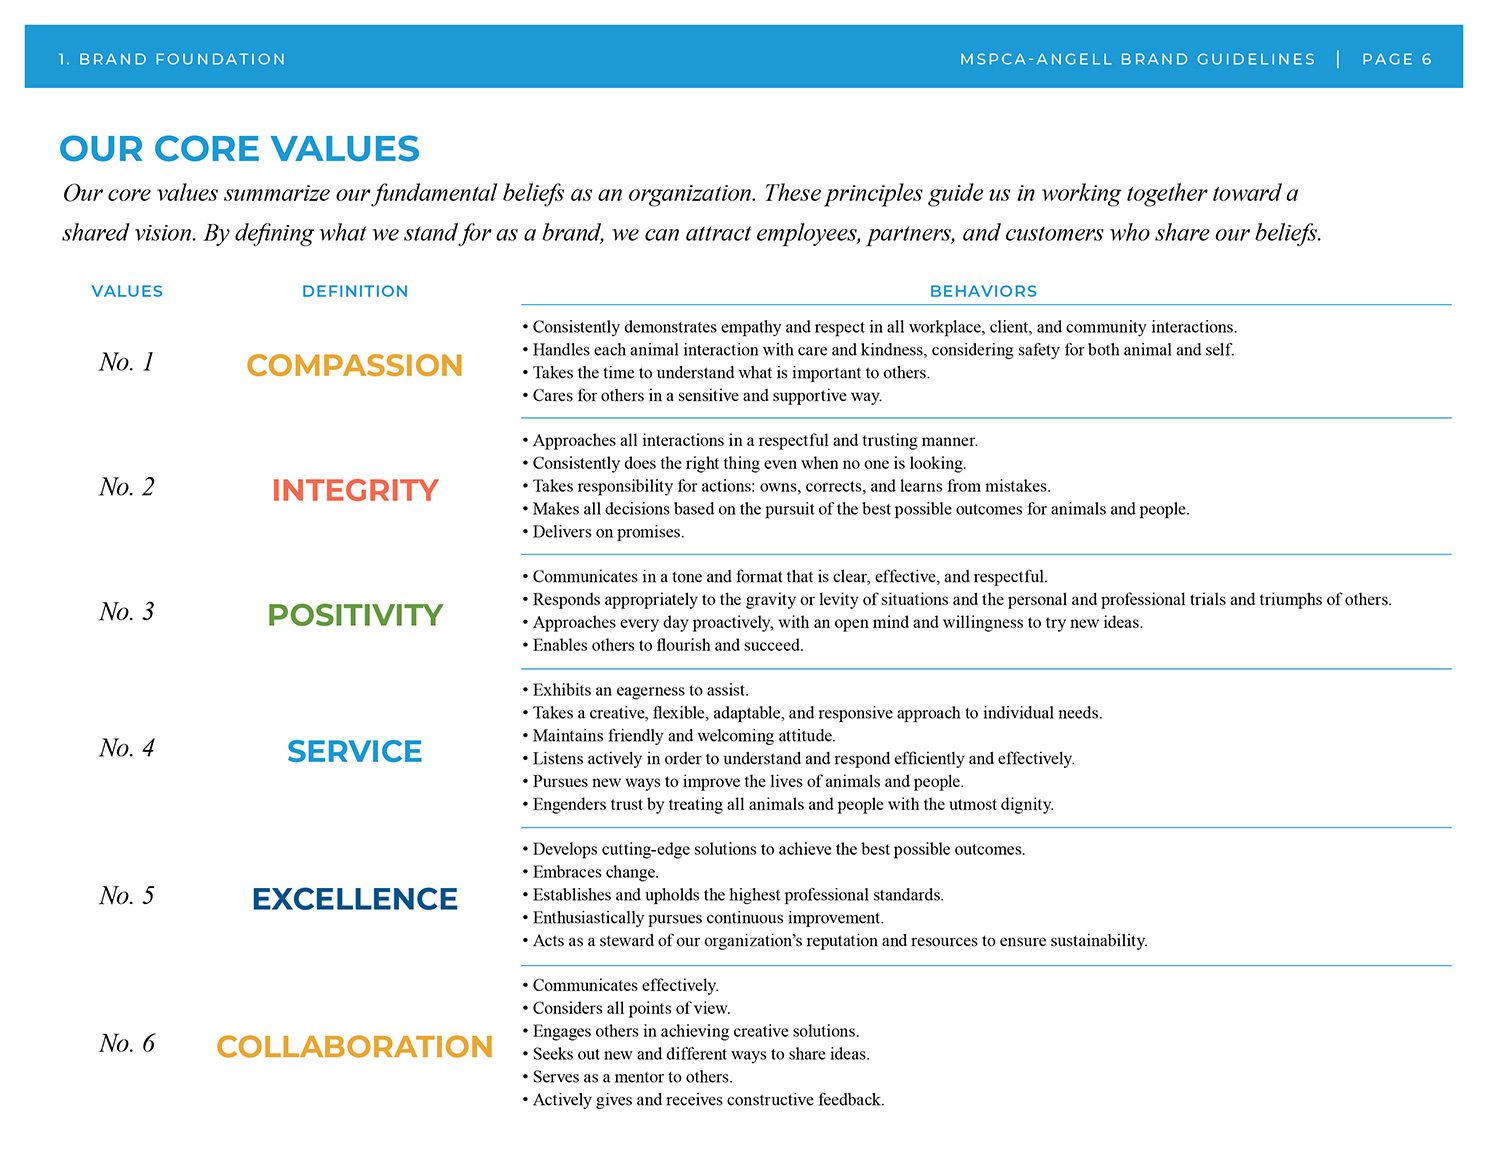 MSPCA-Angell brand guide core values